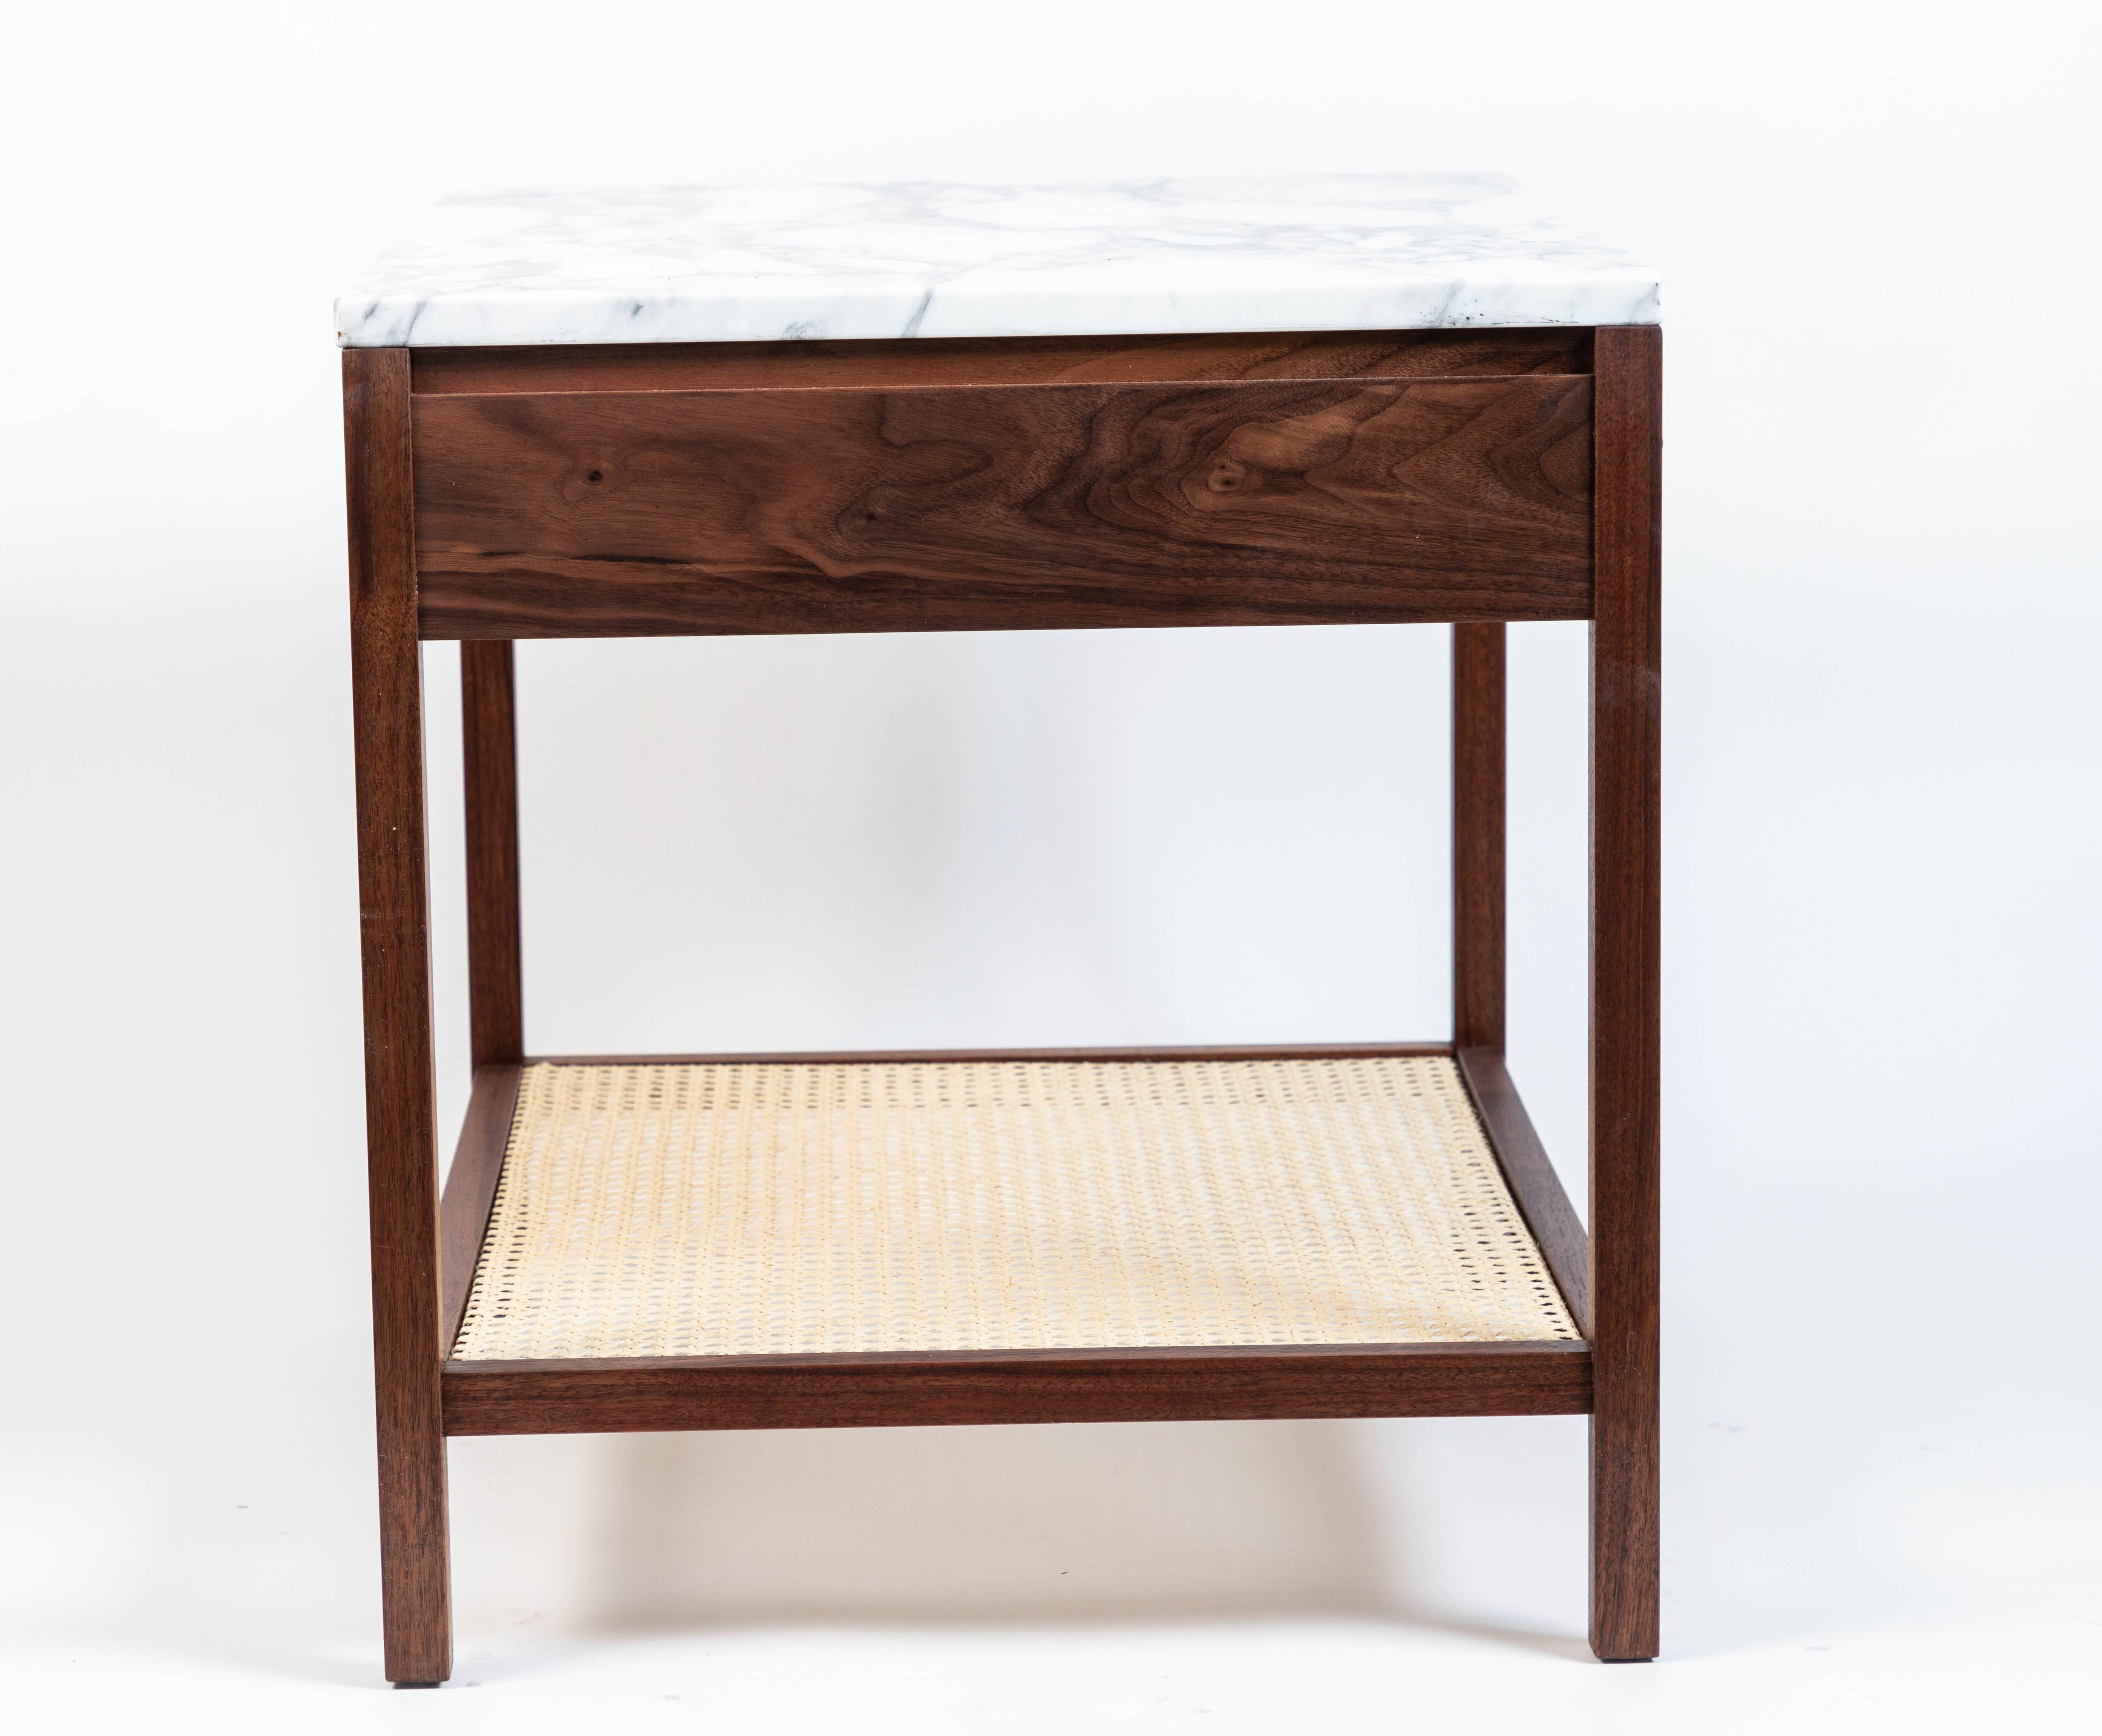 Contemporary Custom-Made Walnut End Table with a Marble Top and Caned Bottom Shelf 